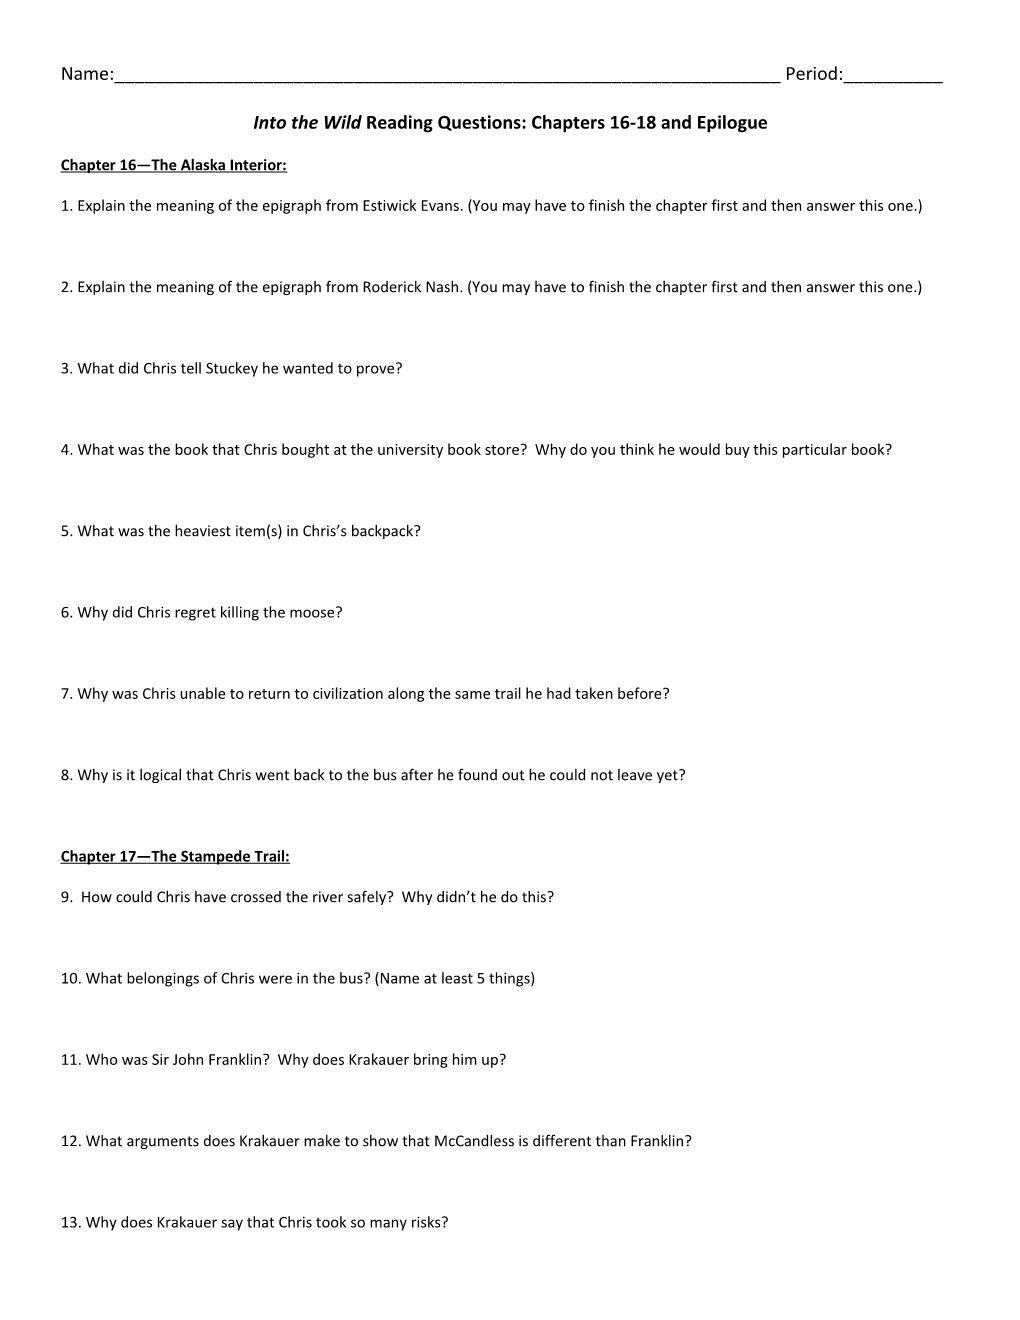 Into the Wild by Jon Krakauer Reading Questions